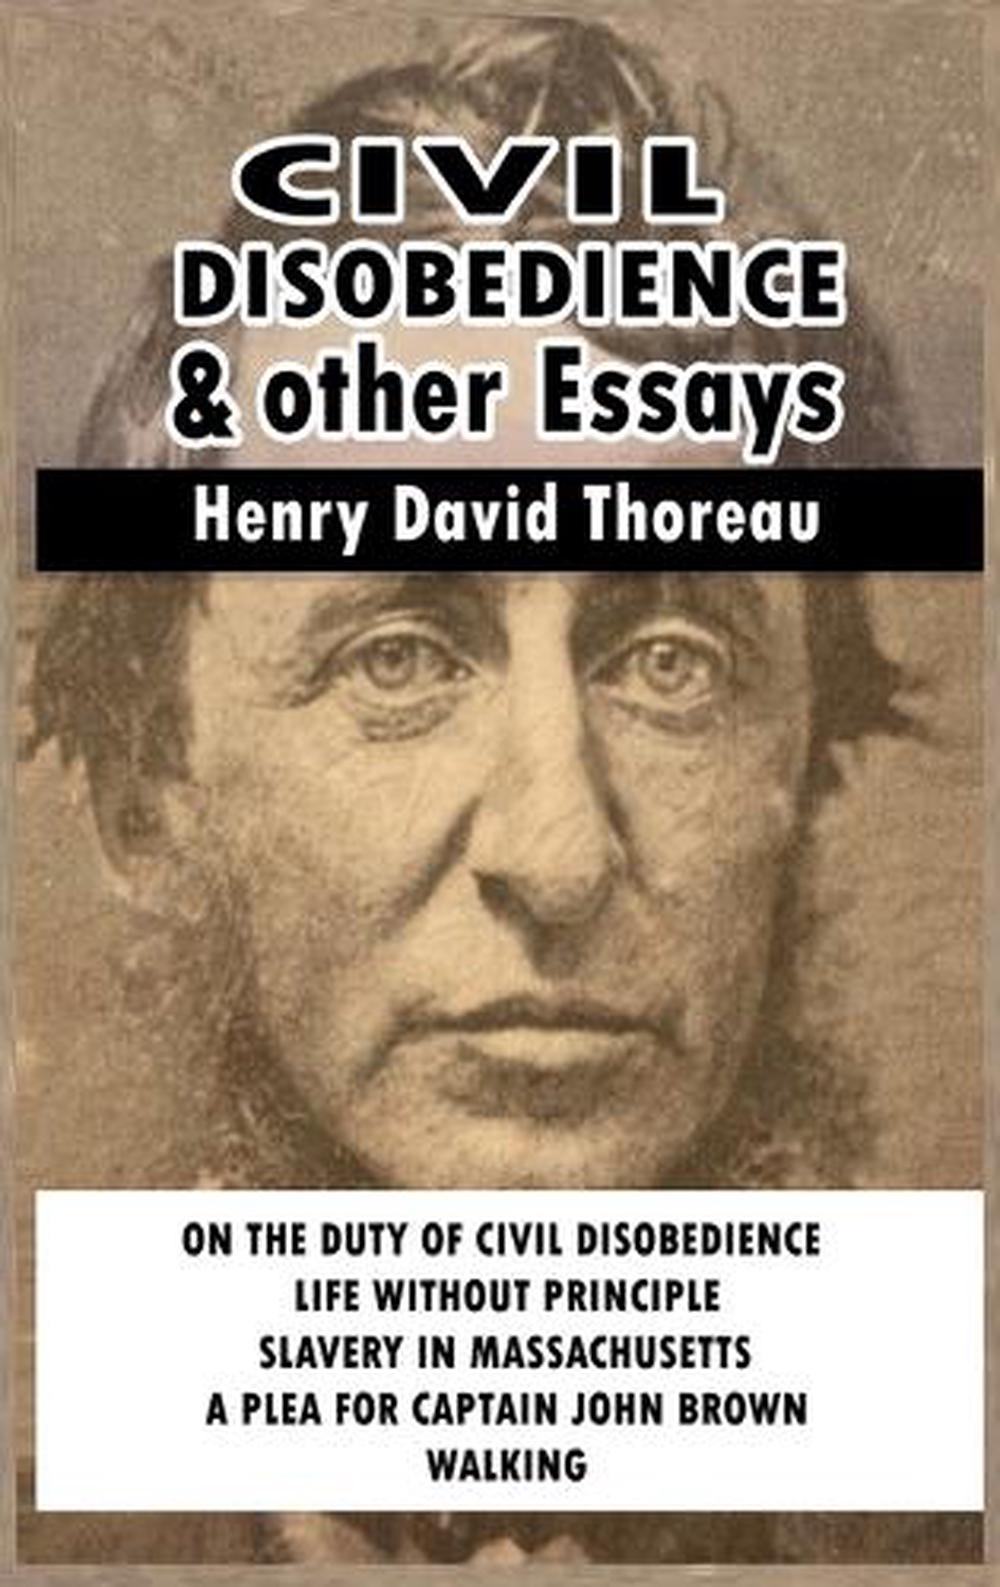 civil disobedience essay meaning